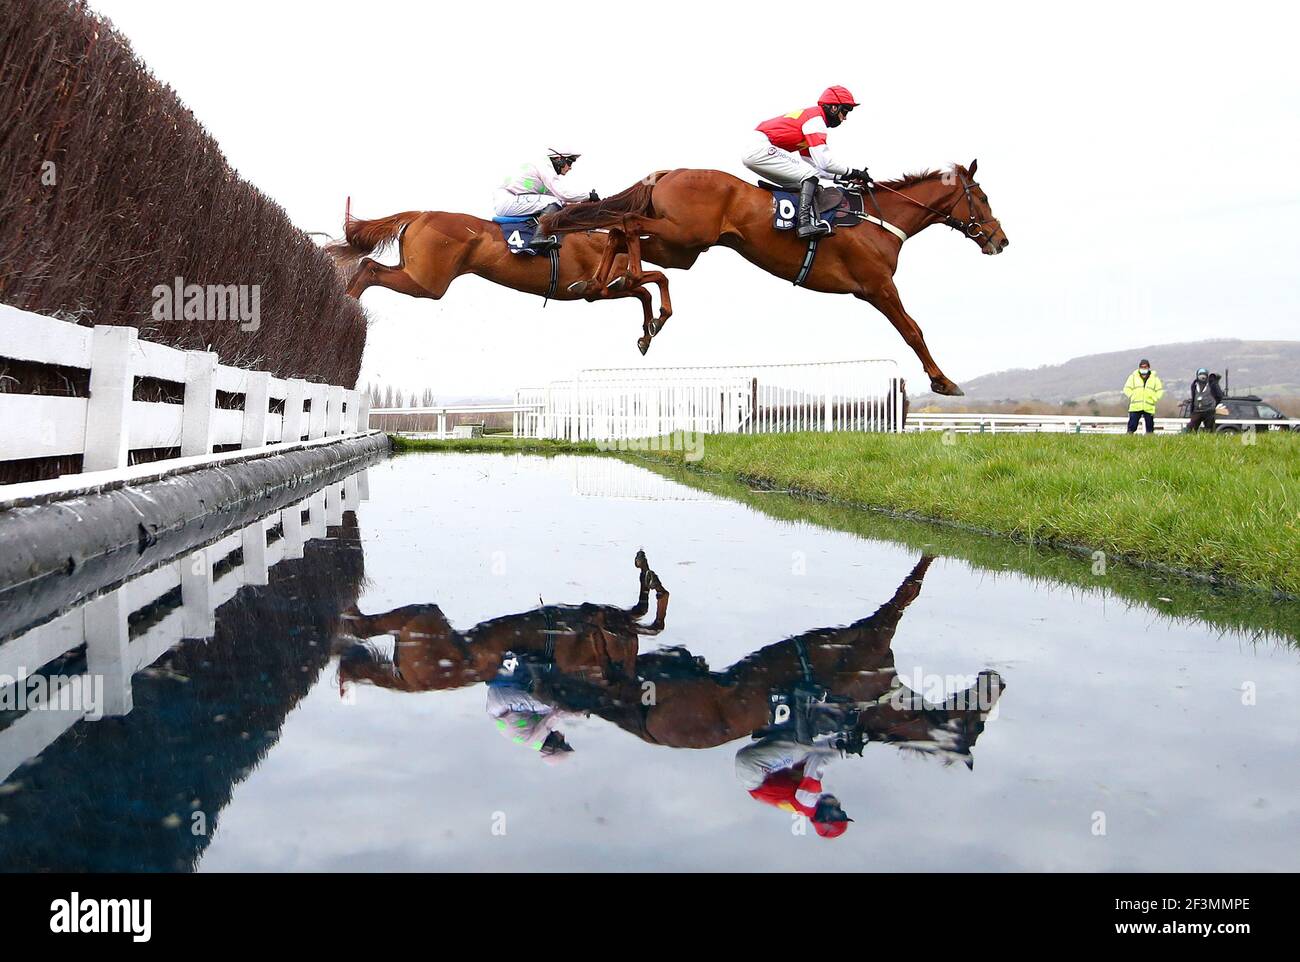 Monkfish (left) ridden by Paul Townend and The Big Breakaway (right) ridden by Harry Cobden jump a water fence during the Brown Advisory Novices' Chase during day two of the Cheltenham Festival at Cheltenham Racecourse. Picture date: Wednesday March 17, 2021. Stock Photo